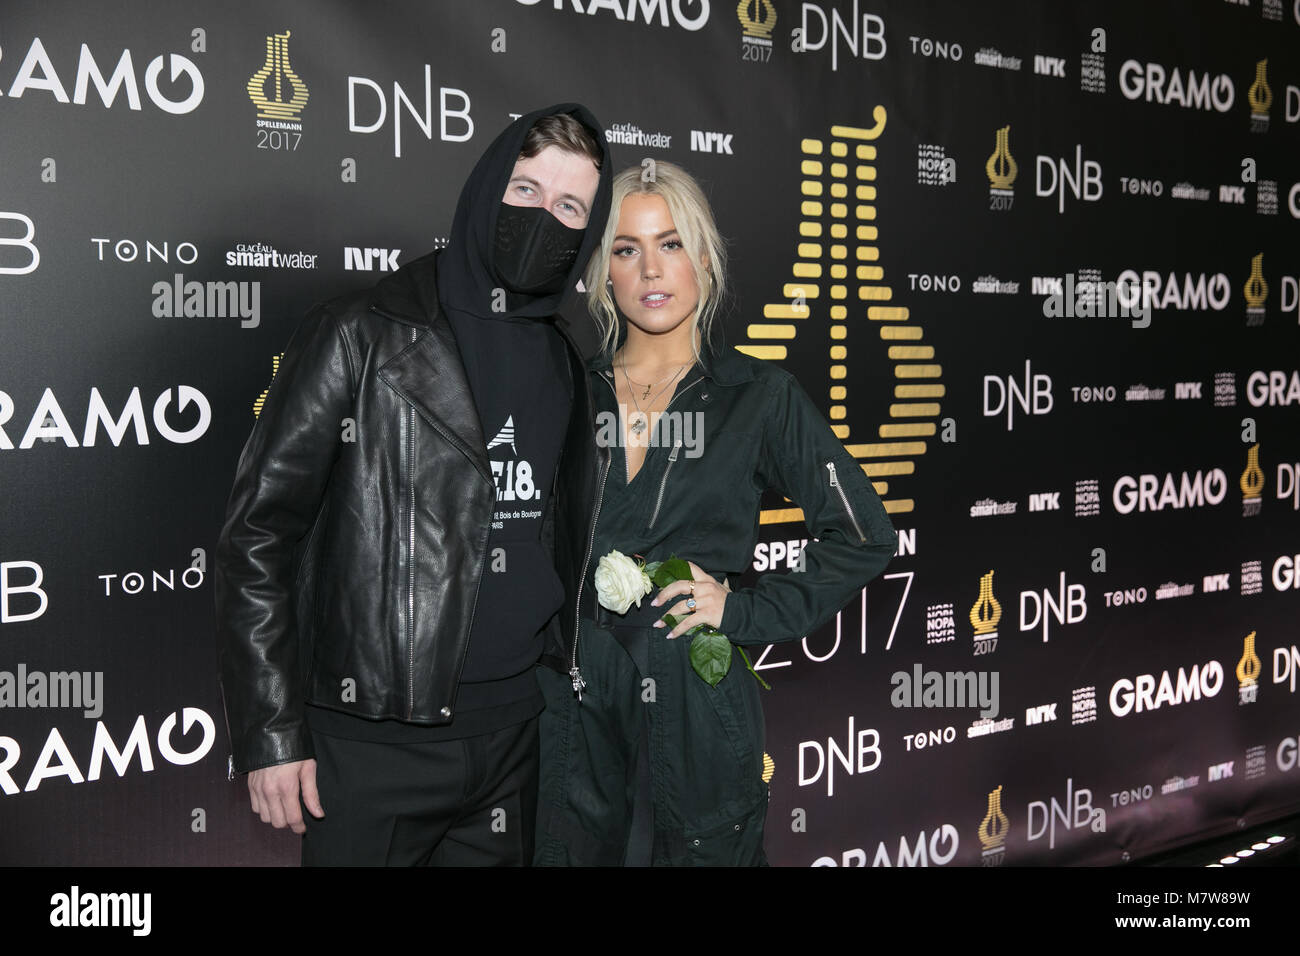 Norway, Oslo - February 25, 2018. The Norwegian record producer Alan Walker  and singer Julie Bergan are seen at the red carpet at the Norwegian Grammy  Awards, Spellemannprisen 2017, in Oslo. (Photo